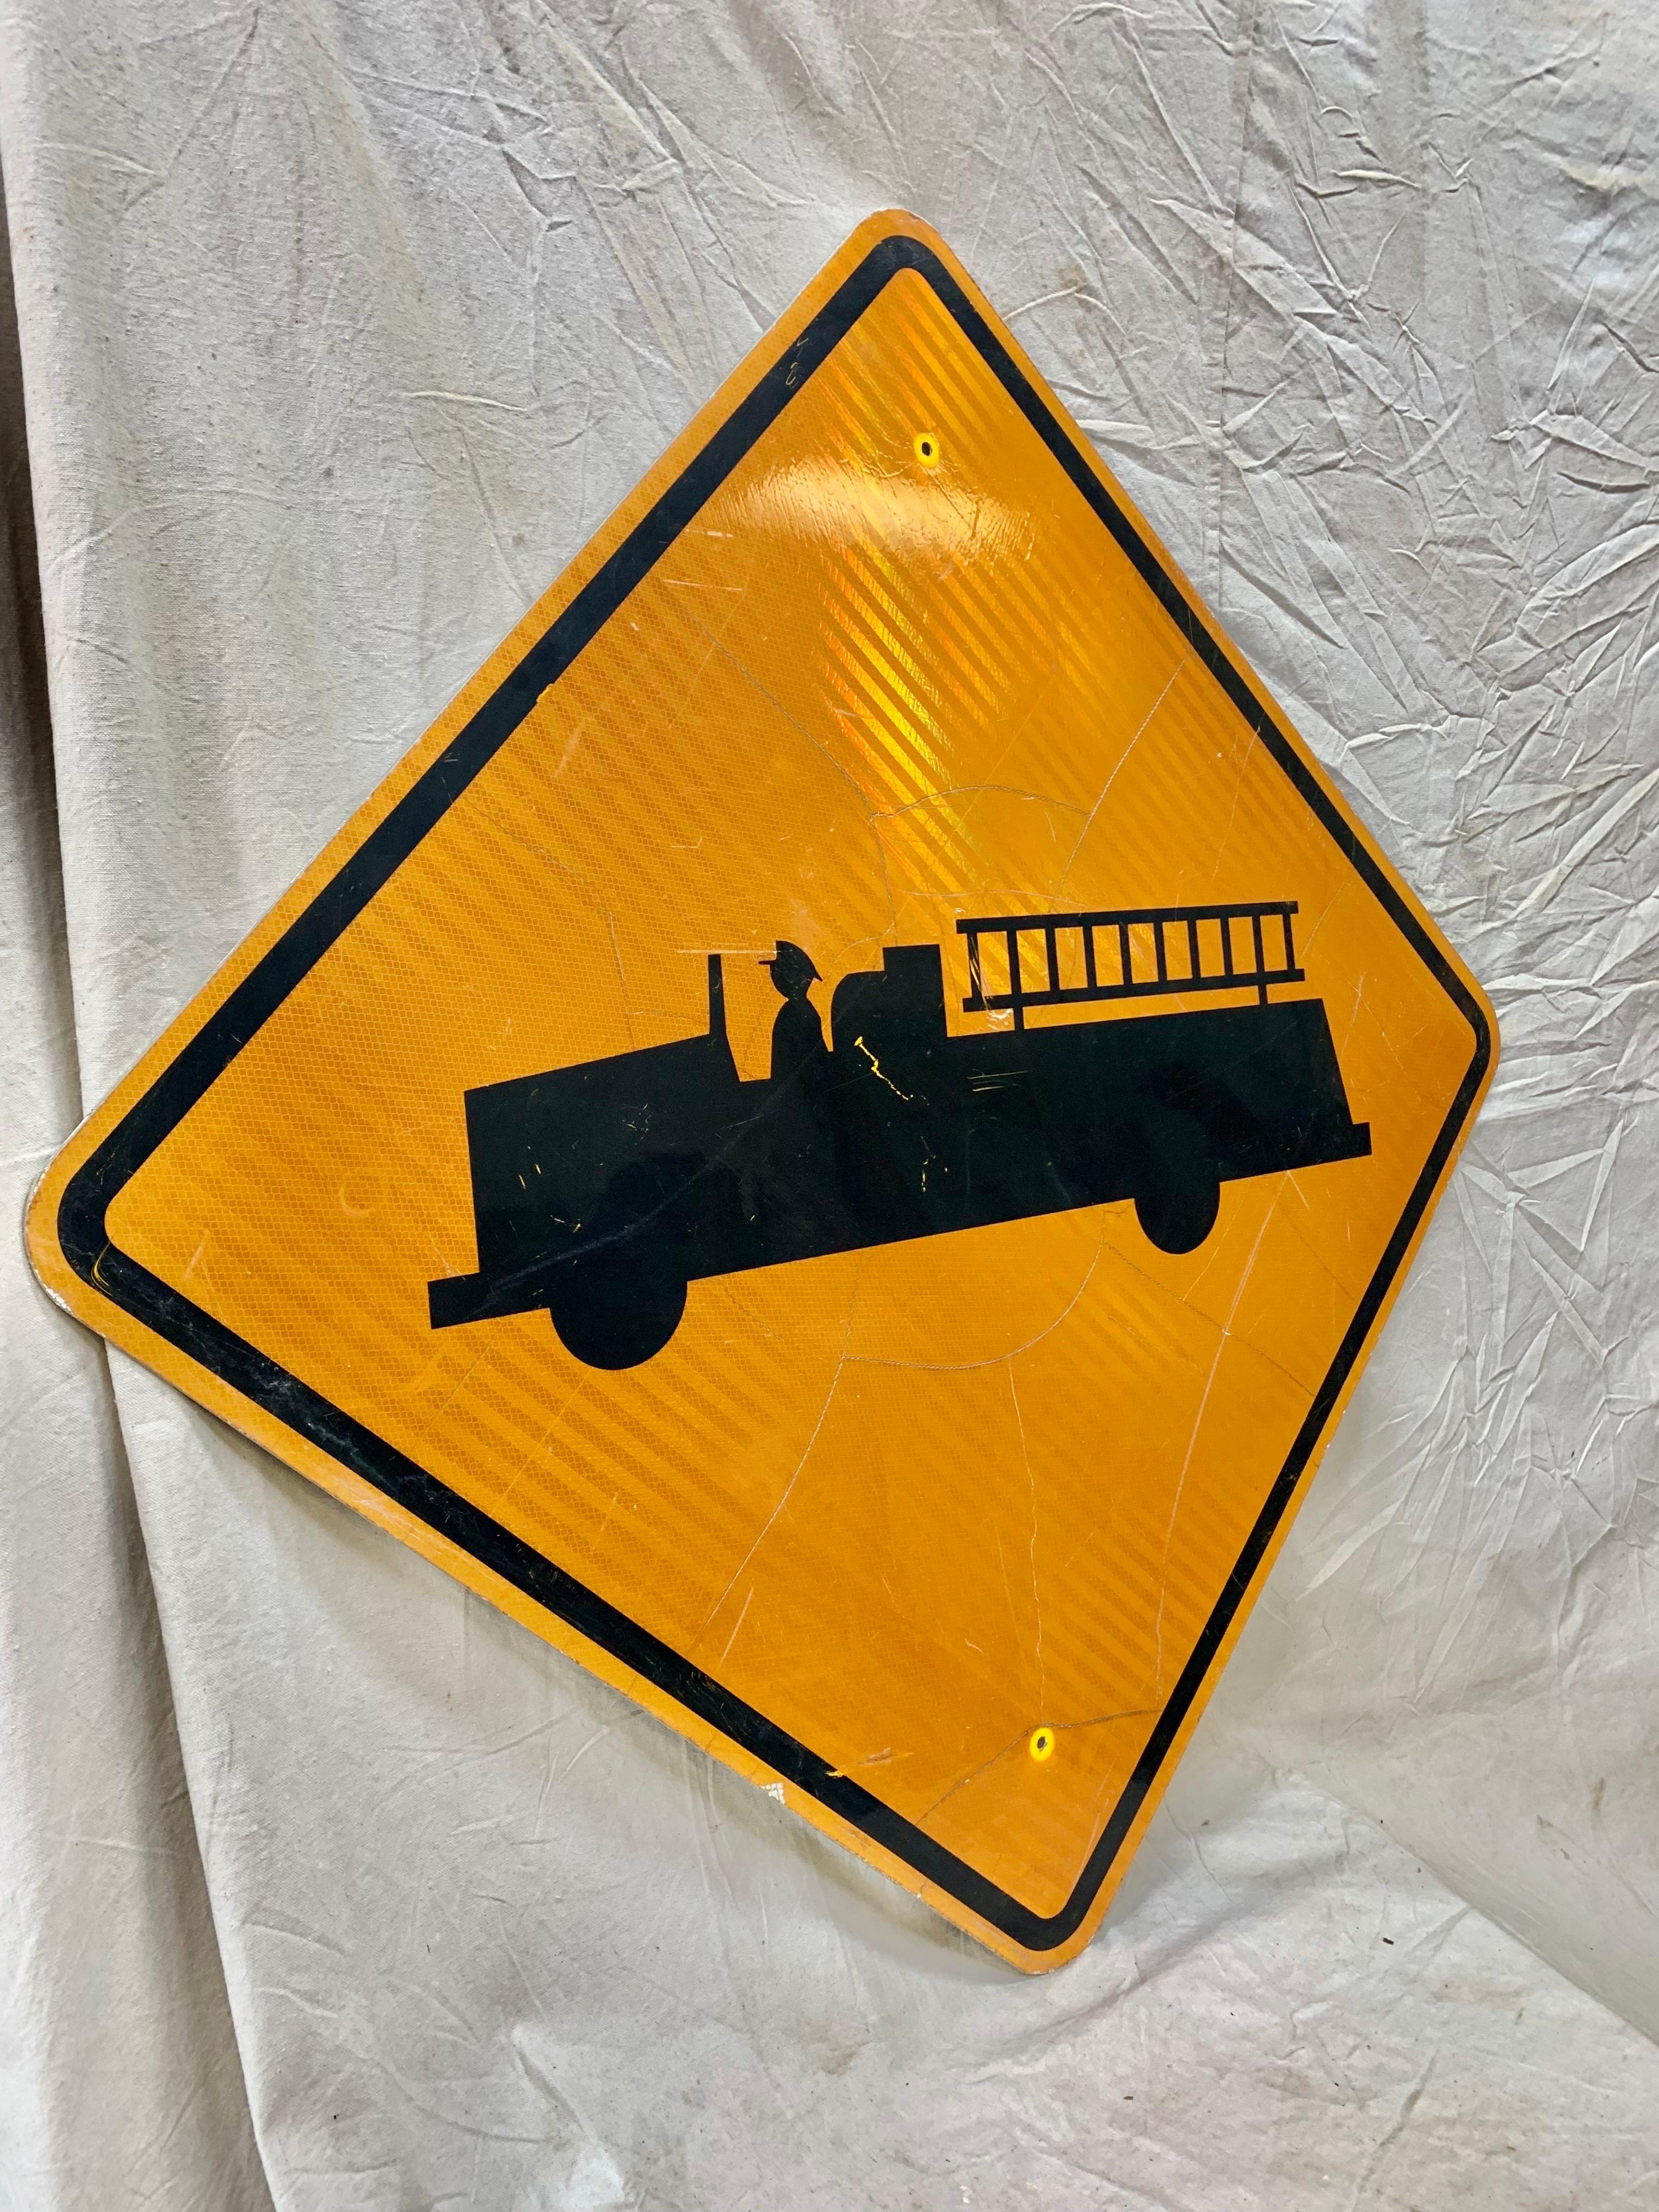 This Vintage Reflective Road Sign depicts a black firetruck with a yellow background. Once used as a street sign to inform motorist of firetrucks entering and exiting the highway, this sign presents great coloring, subject matter and patina. Today